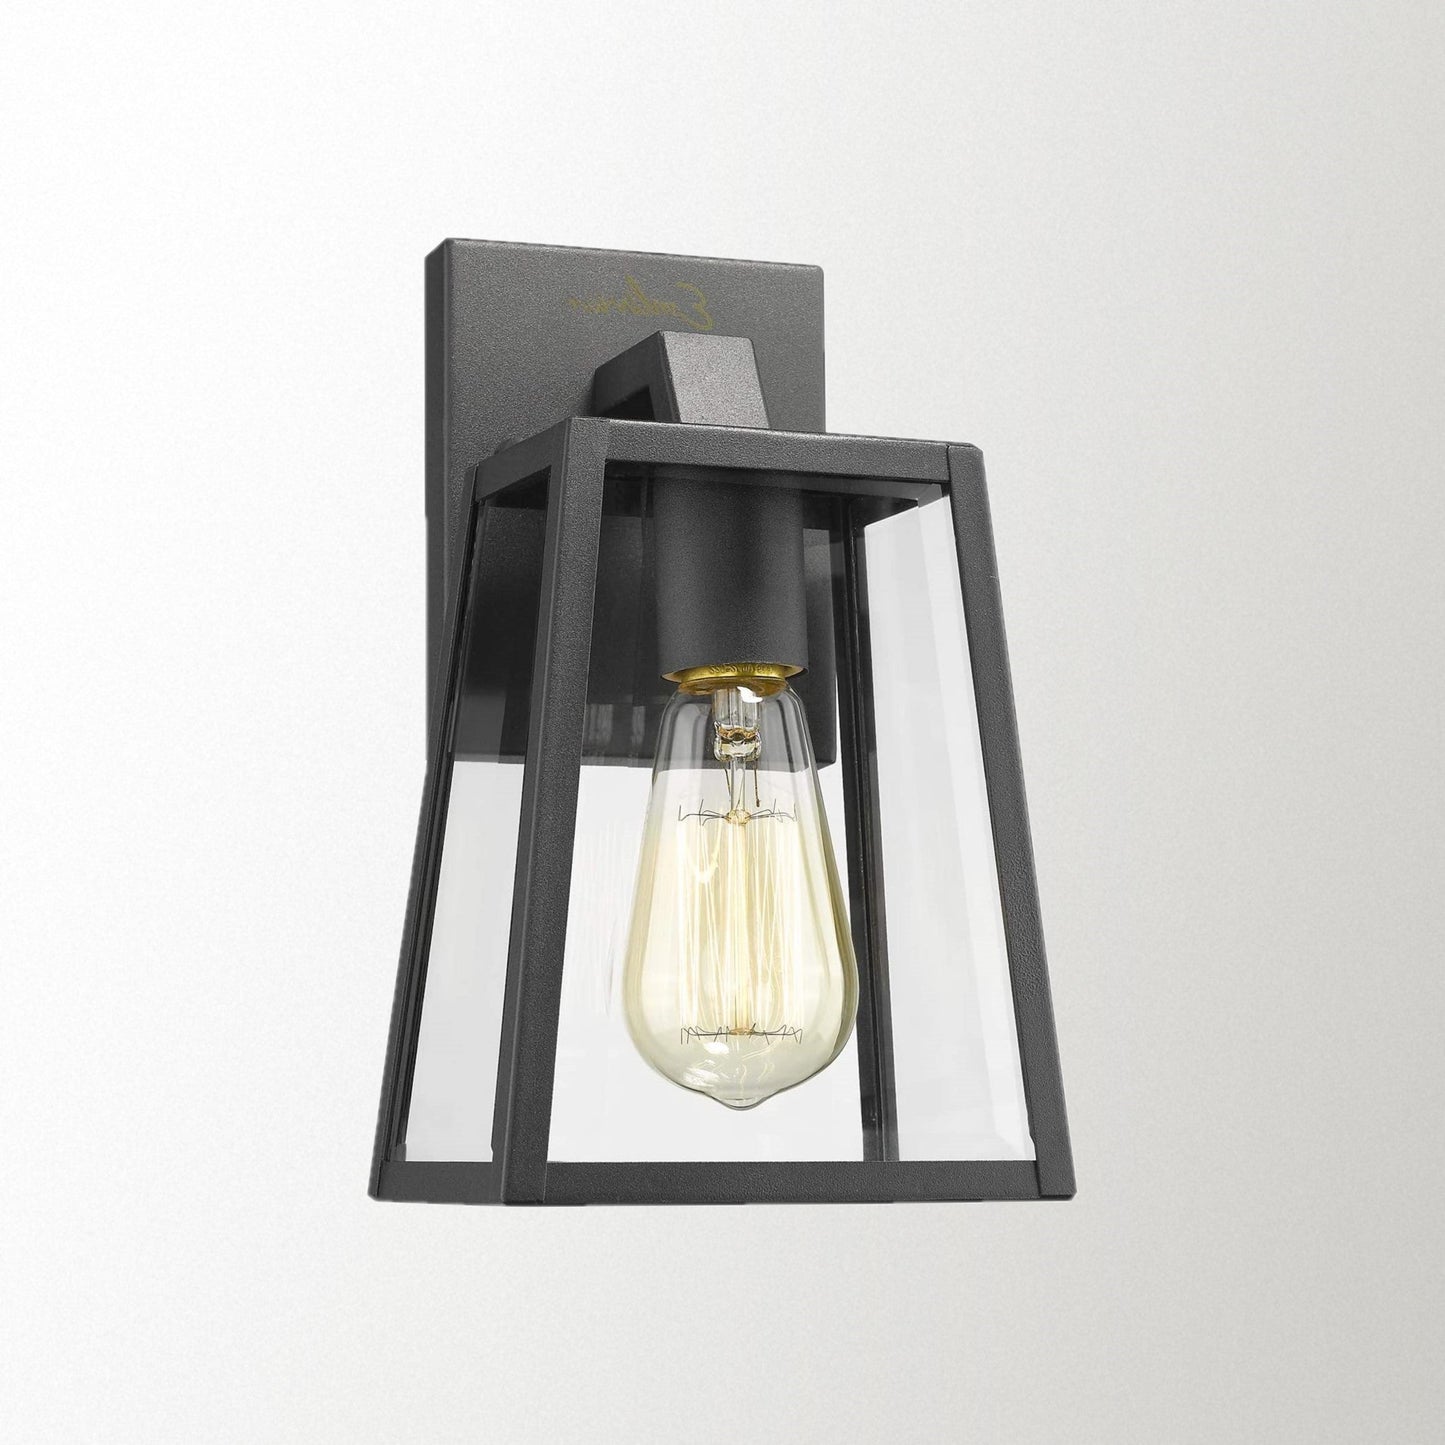 
                  
                    Emliviar Outdoor Wall Mounted Light Single Light Exterior Wall Sconce Lantern, Black Finish Lamp with Clear Bevel Glass,OS-1803AW1
                  
                